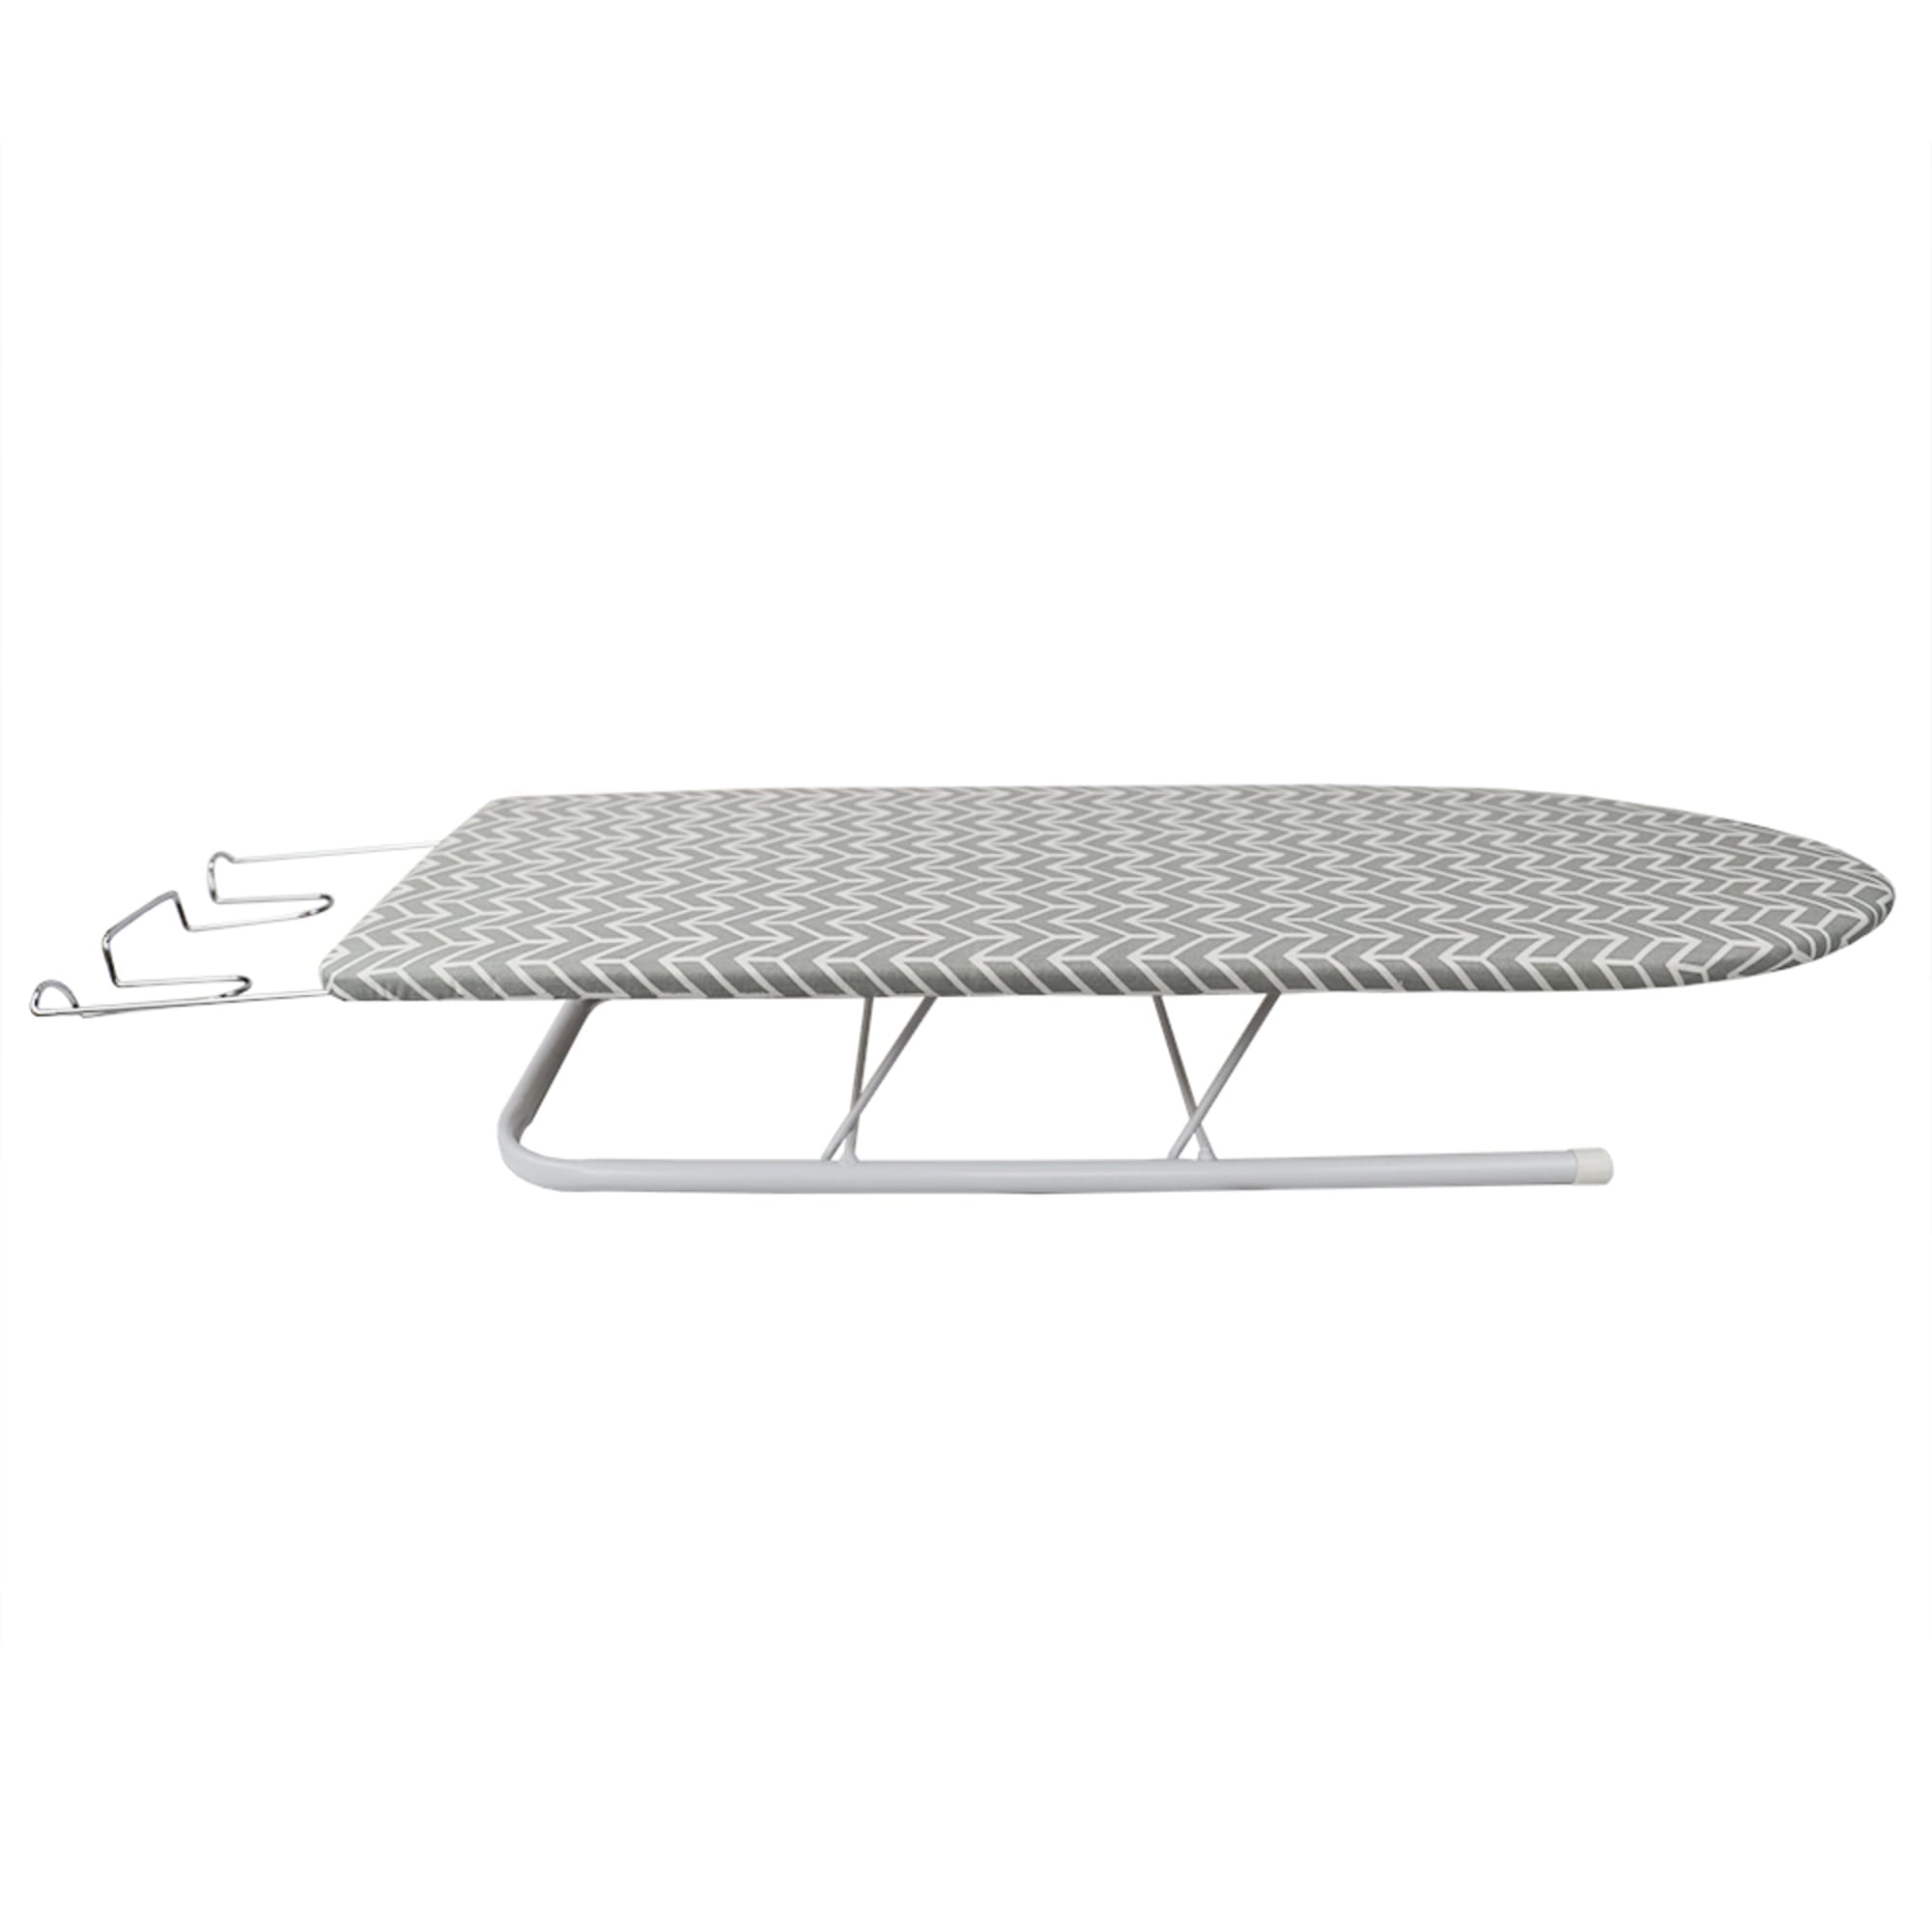 Home Basics Tabletop Ironing Board with Rest and Cover $12 EACH, CASE PACK OF 6